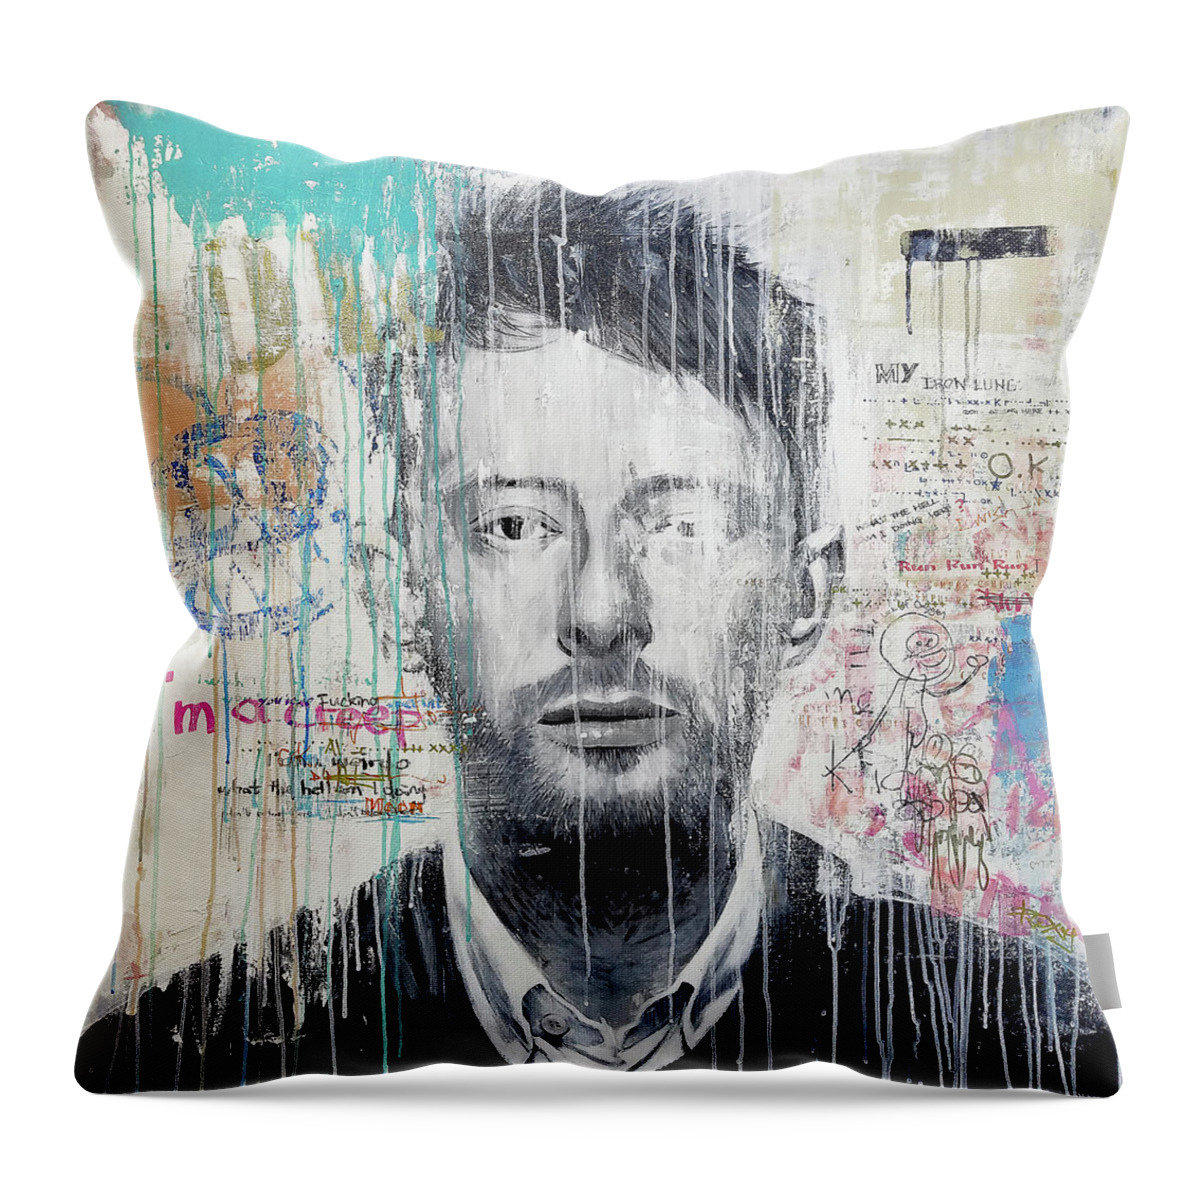 Jimi Hendrix Throw Pillow featuring the painting Radiohead - Thom Yorke by Art Popop